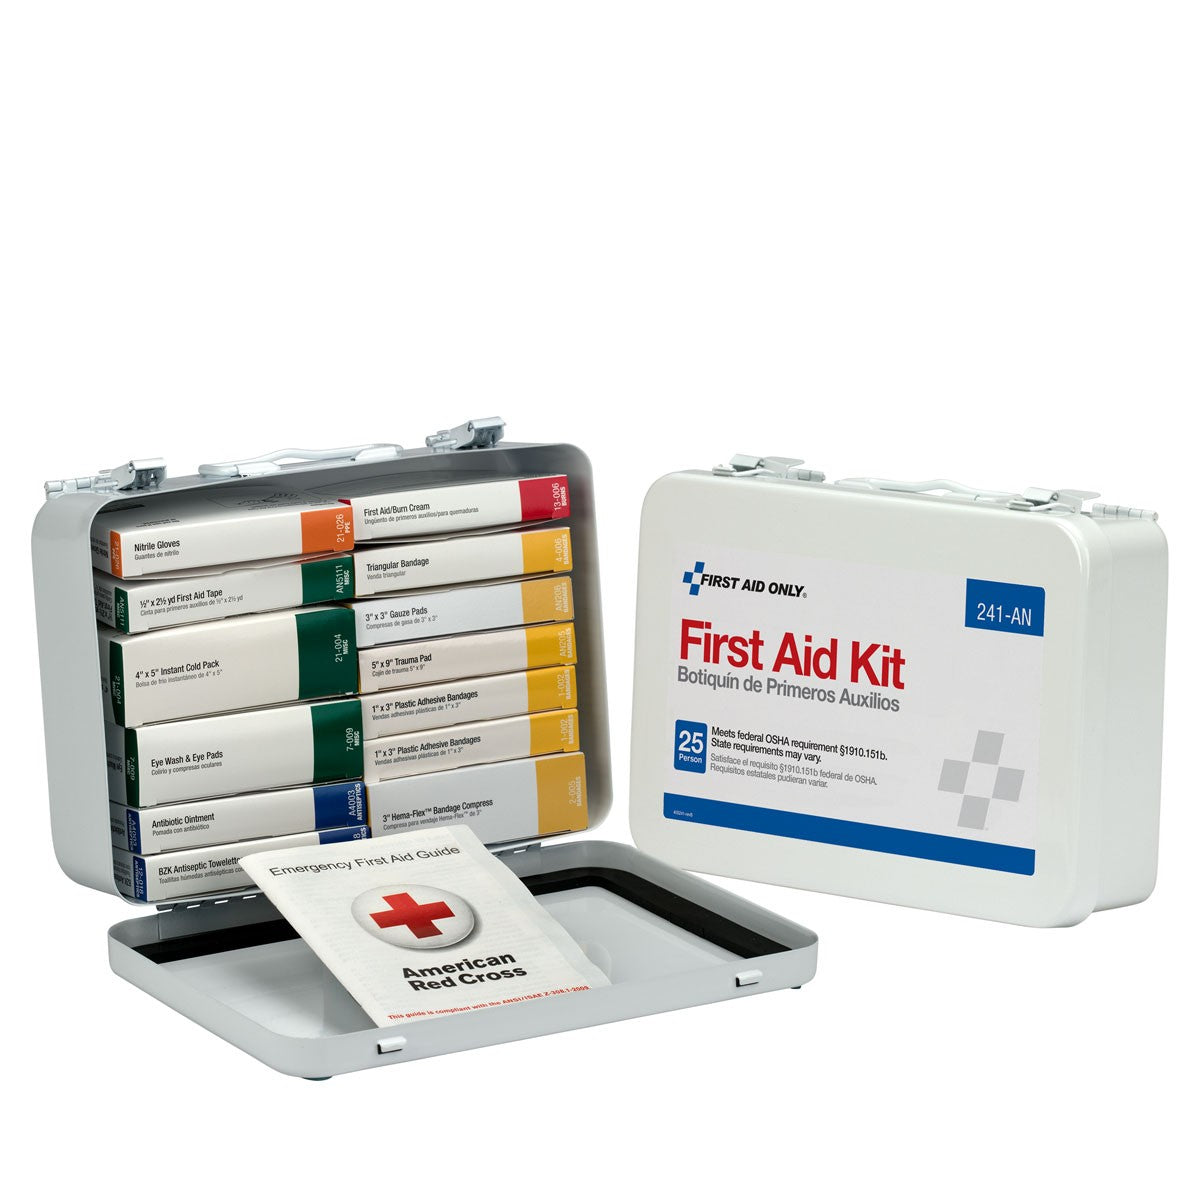 25 Person 16 Unit First Aid Kit, Metal Case - W-241-AN